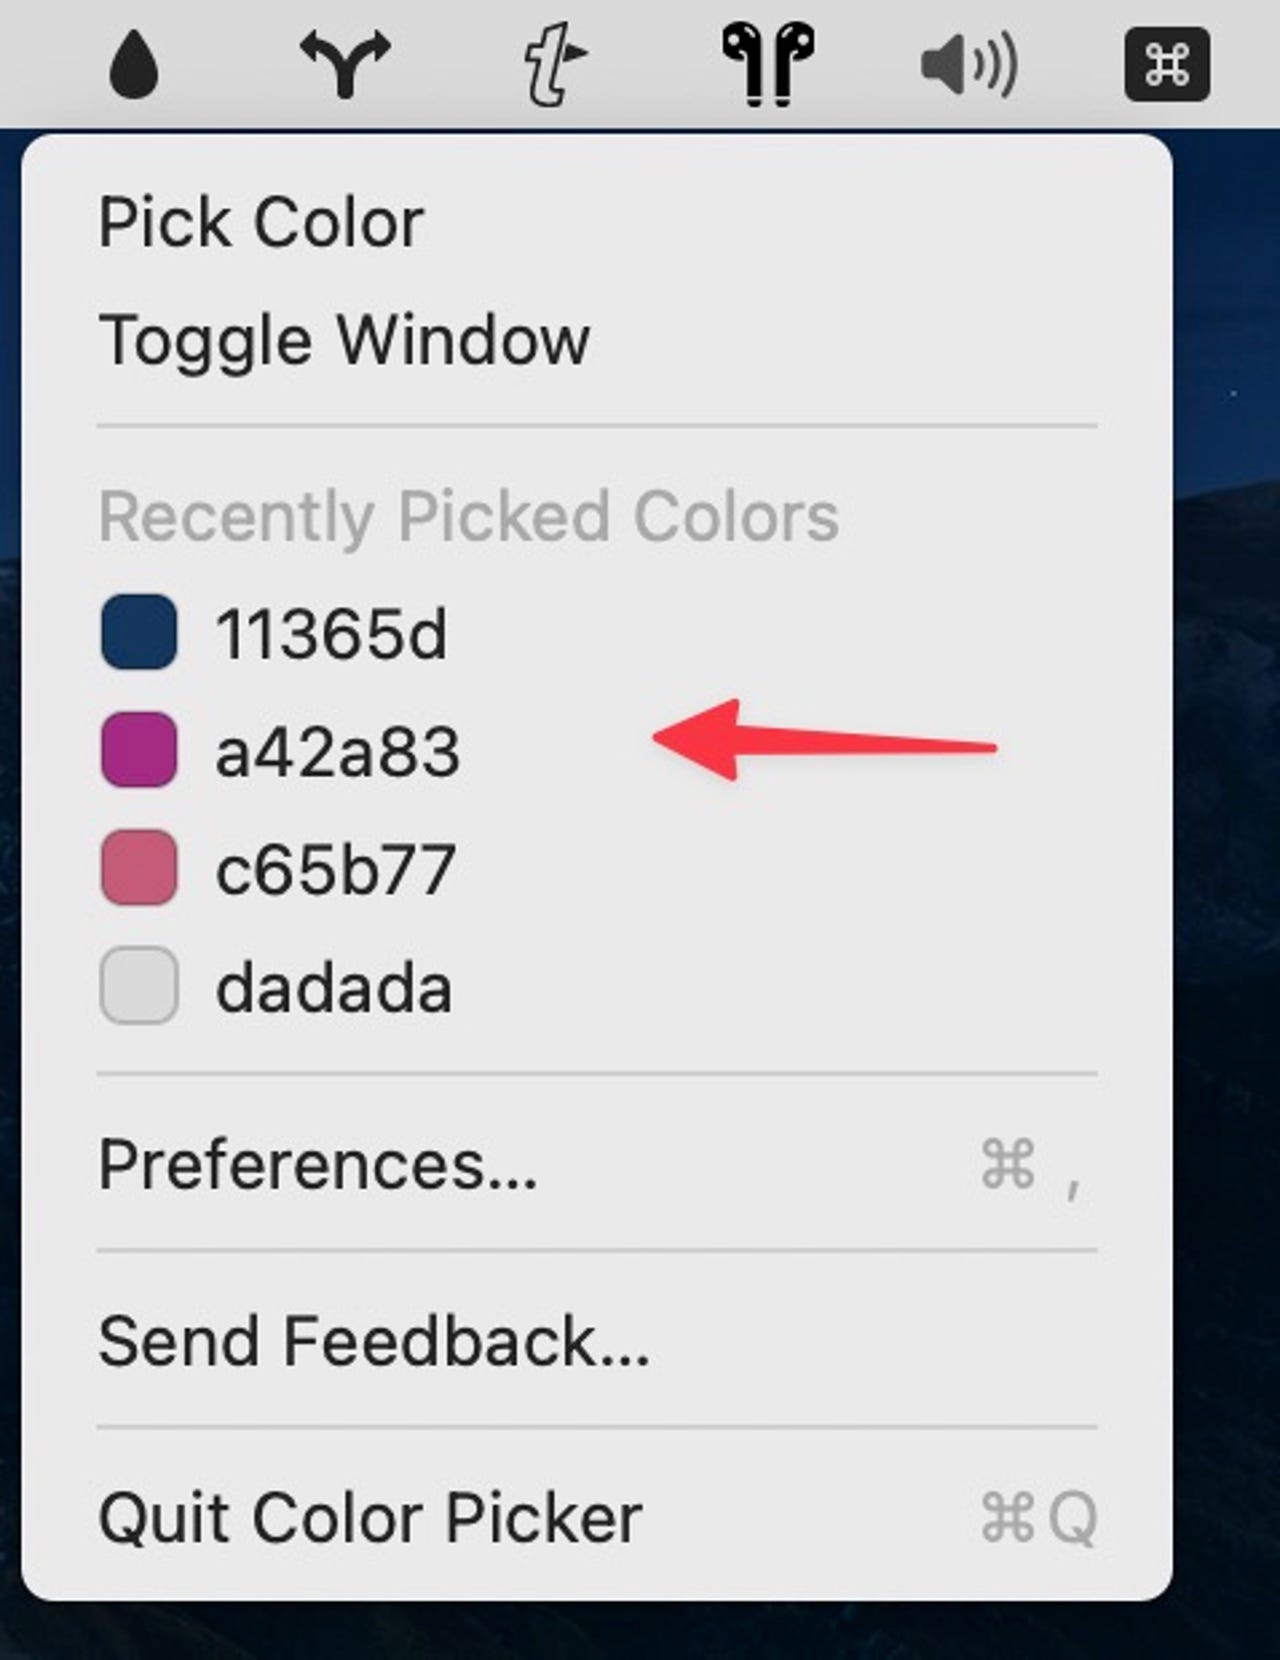 How to copy colors with the Color Picker tool in PowerToys